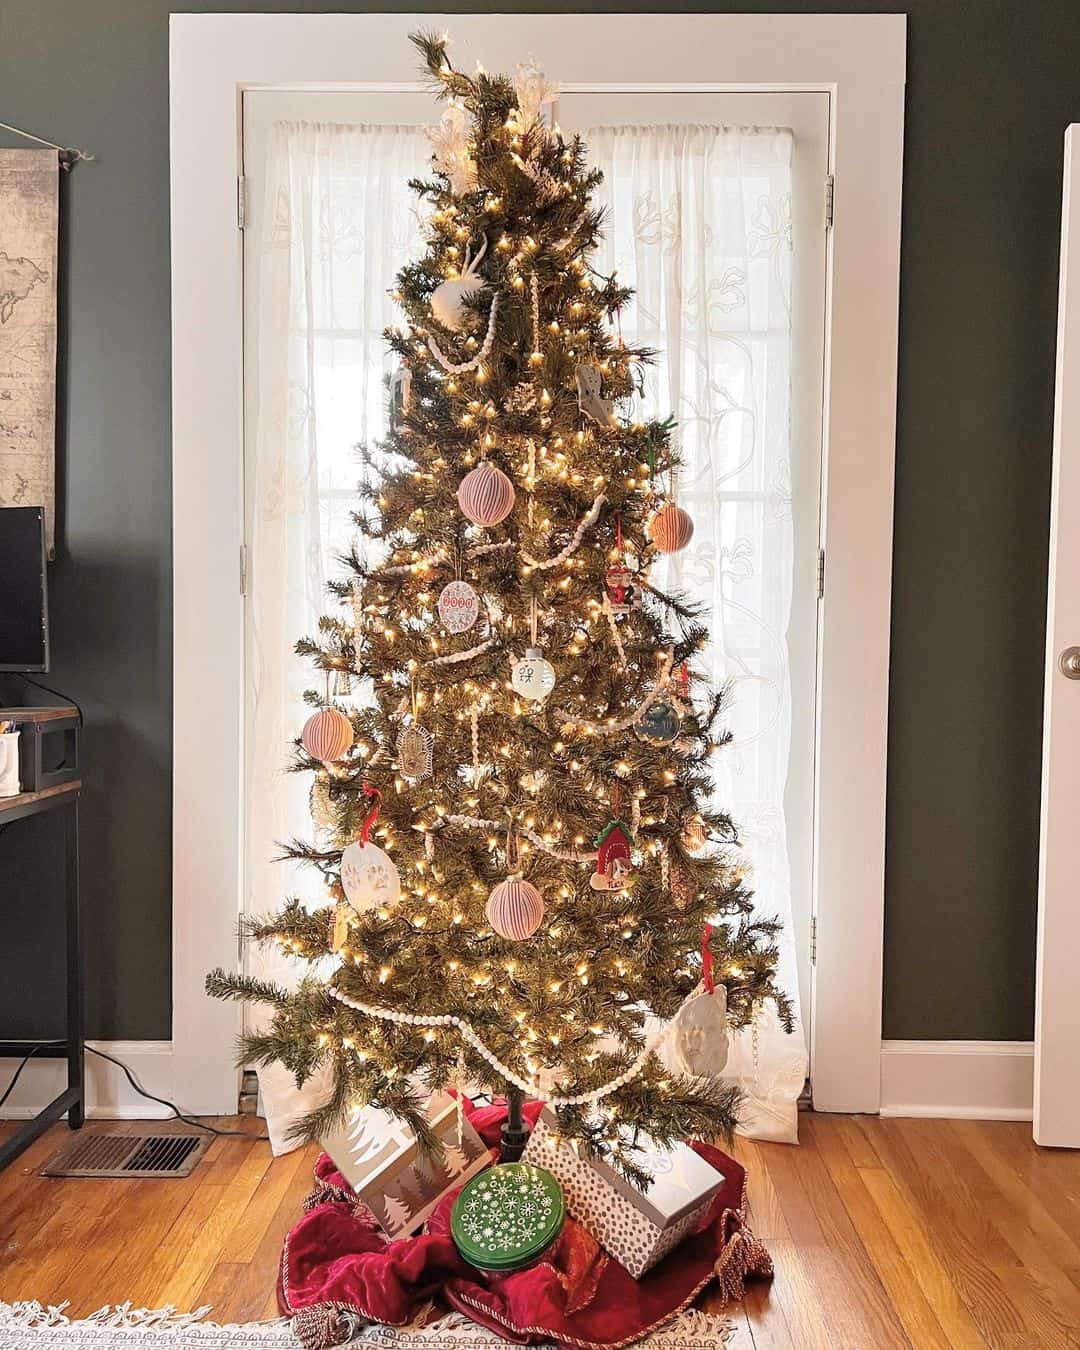 24 Christmas Tree Decorating Ideas for Holiday Magic